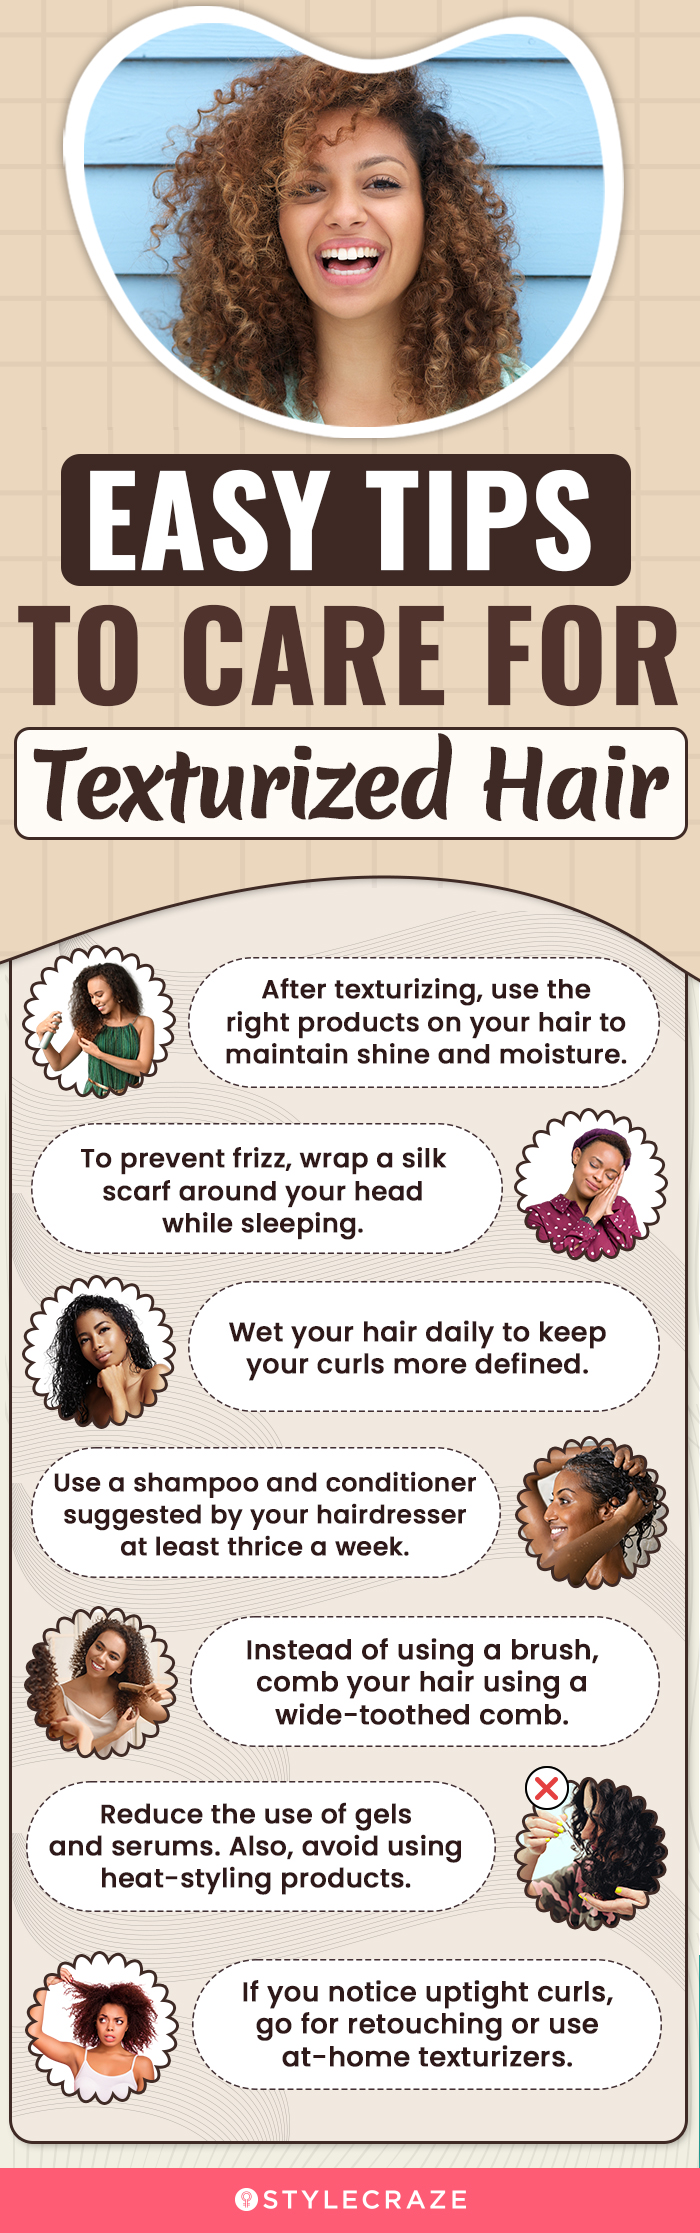 What Is Hair Texturizing? How To Take Care Of Texturized Hair?